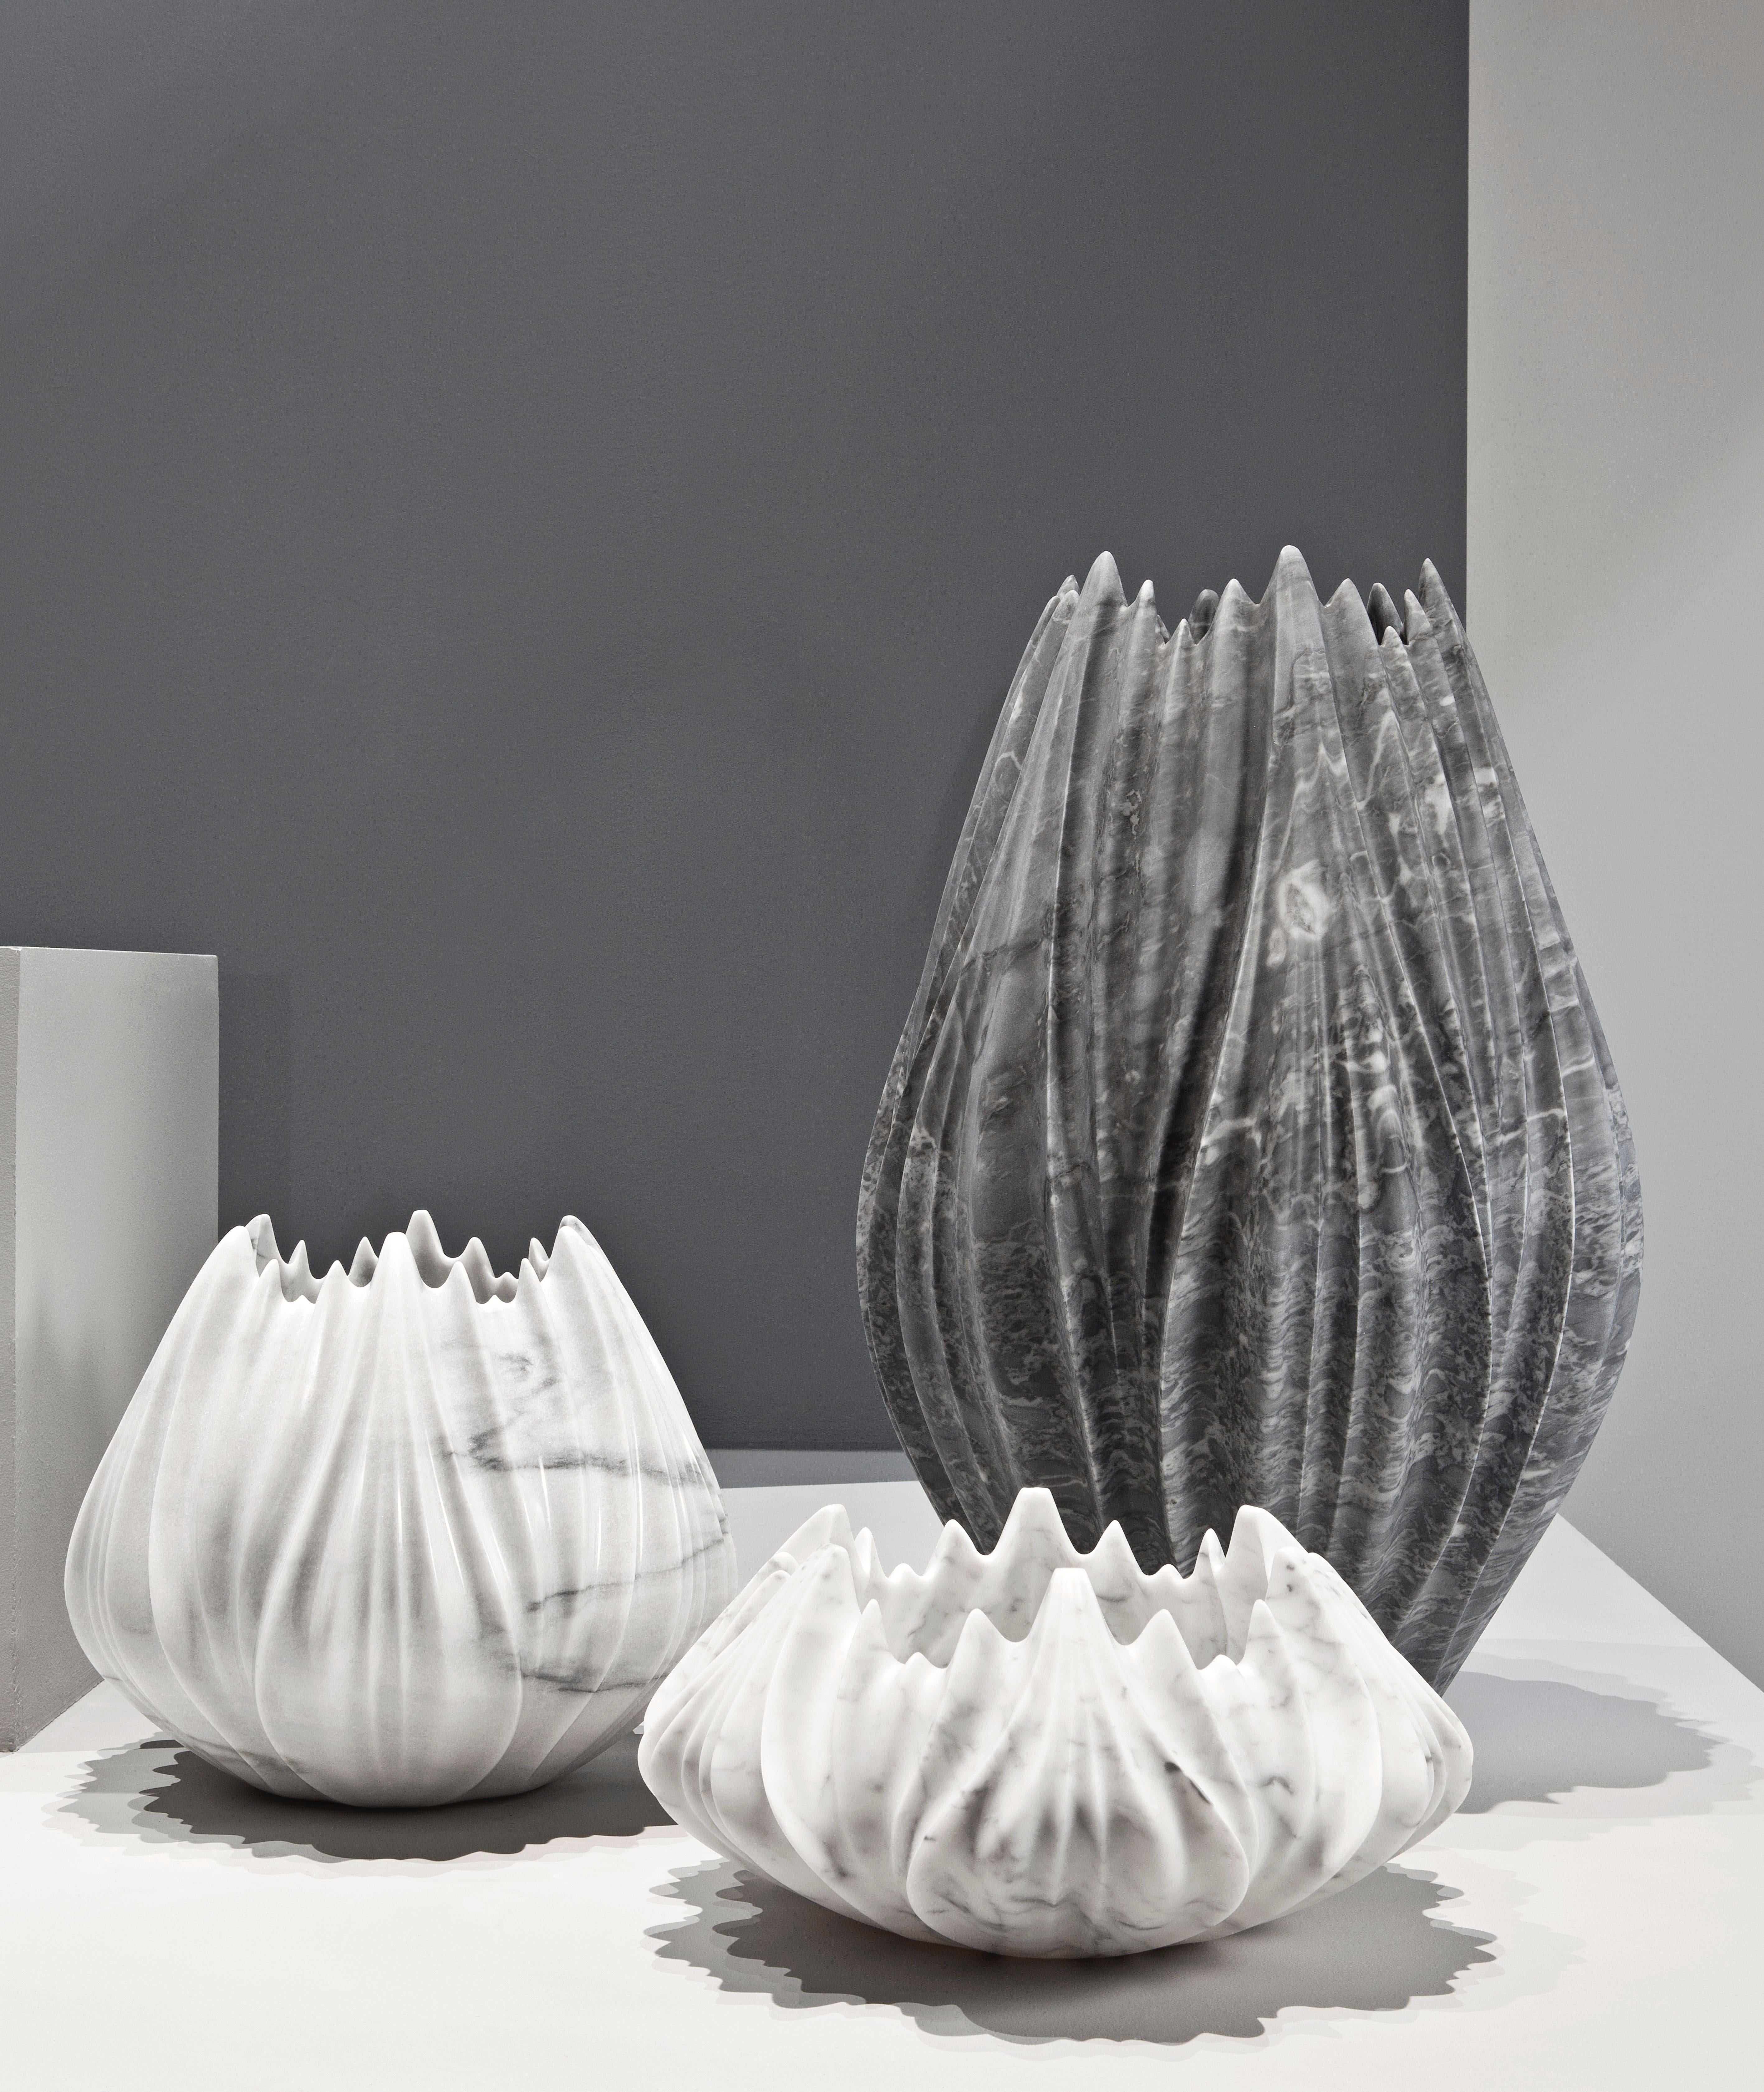 Created by Zaha Hadid together with our Italian partners. Honed in Bianco Carrara marble. This series includes 4 other designs. Limited edition of 24

The Tau vases created by Zaha Hadid appear organic; emerging as a series of intricately rendered